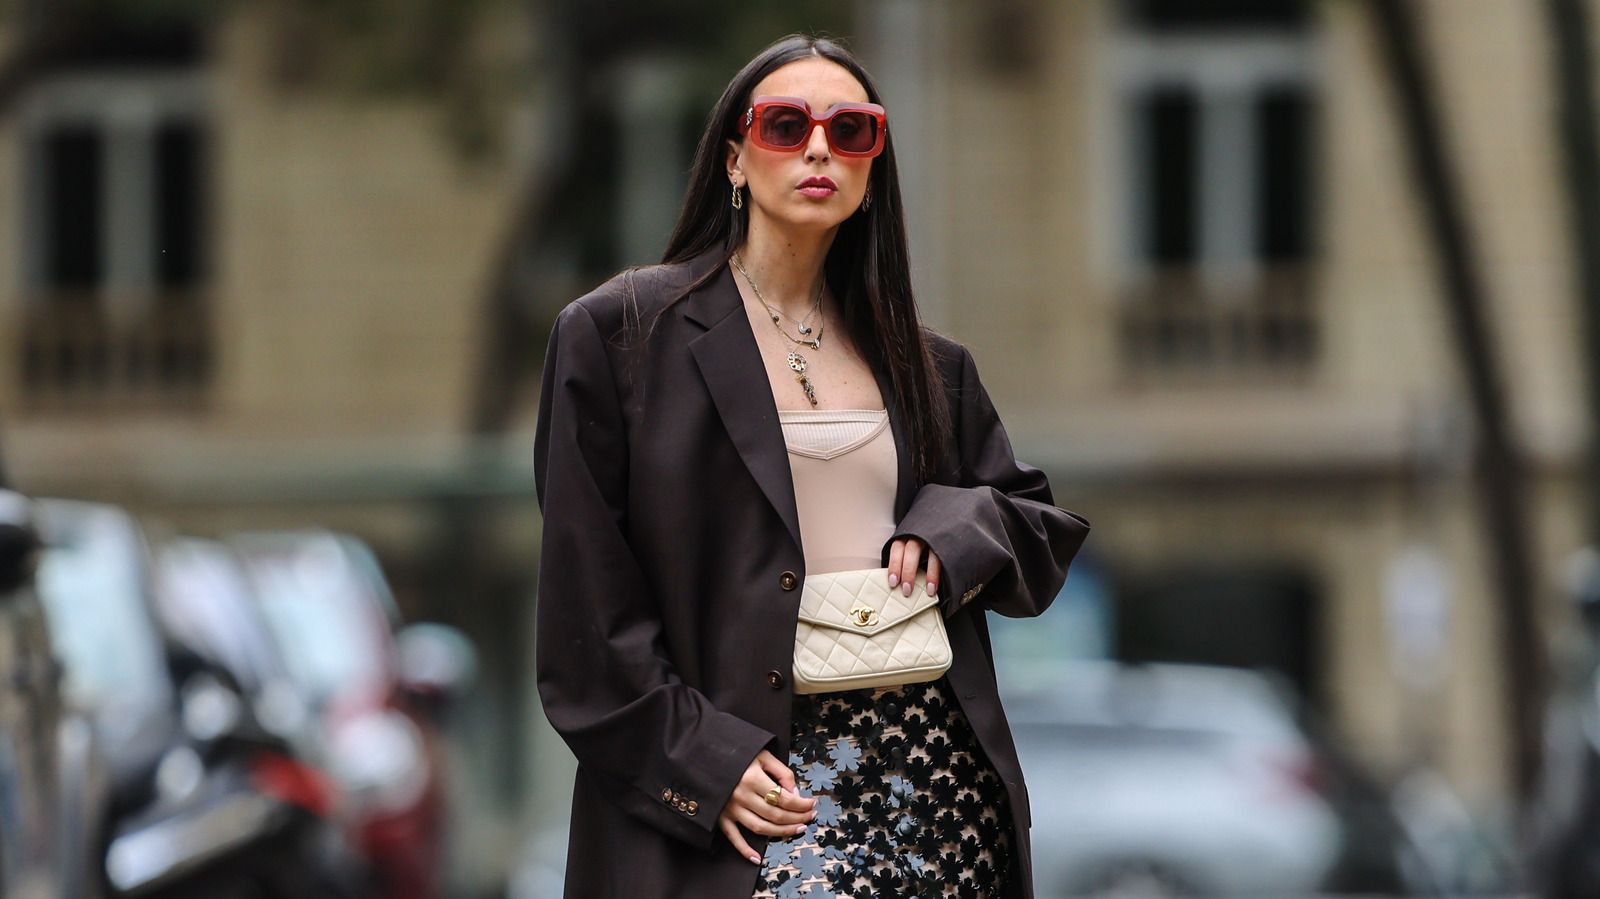 The Accessory Trend You Need To Try This Fall